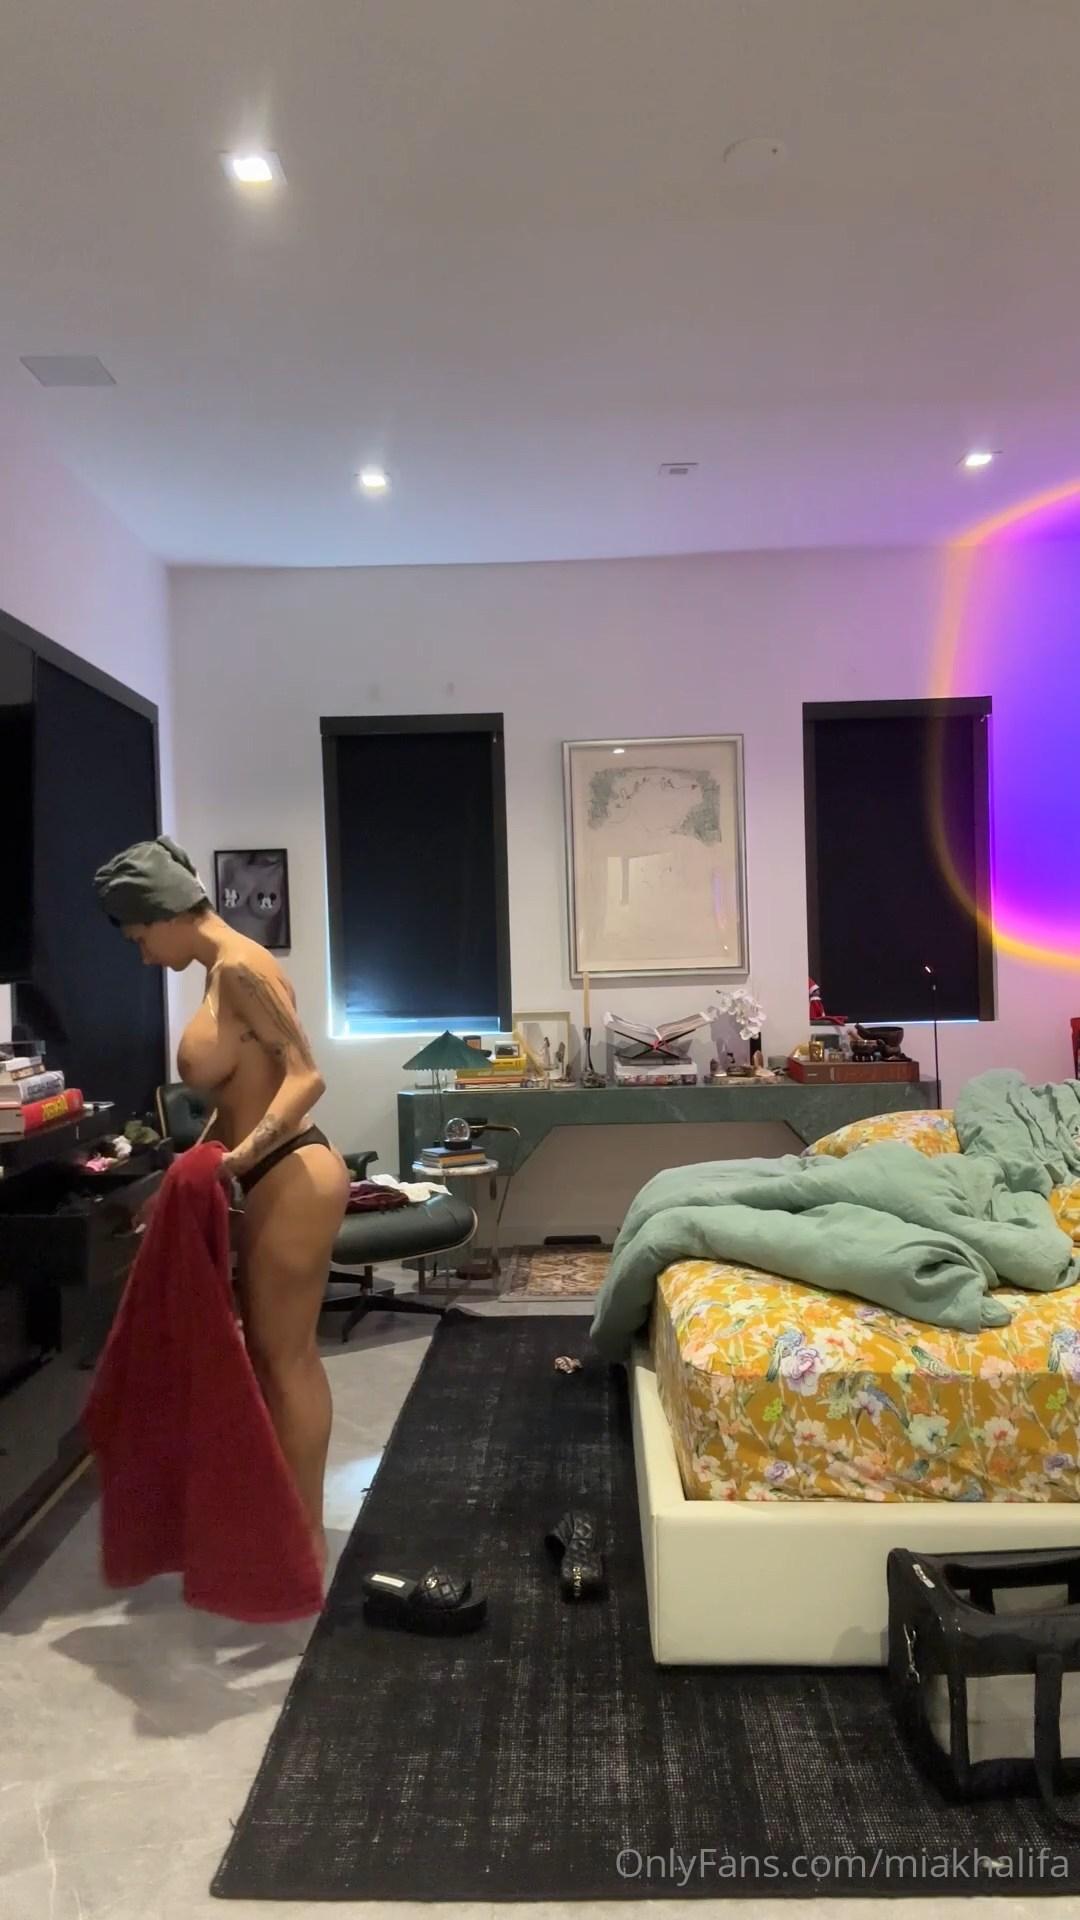 Mia Khalifa Nude Dressing After Shower OnlyFans Video